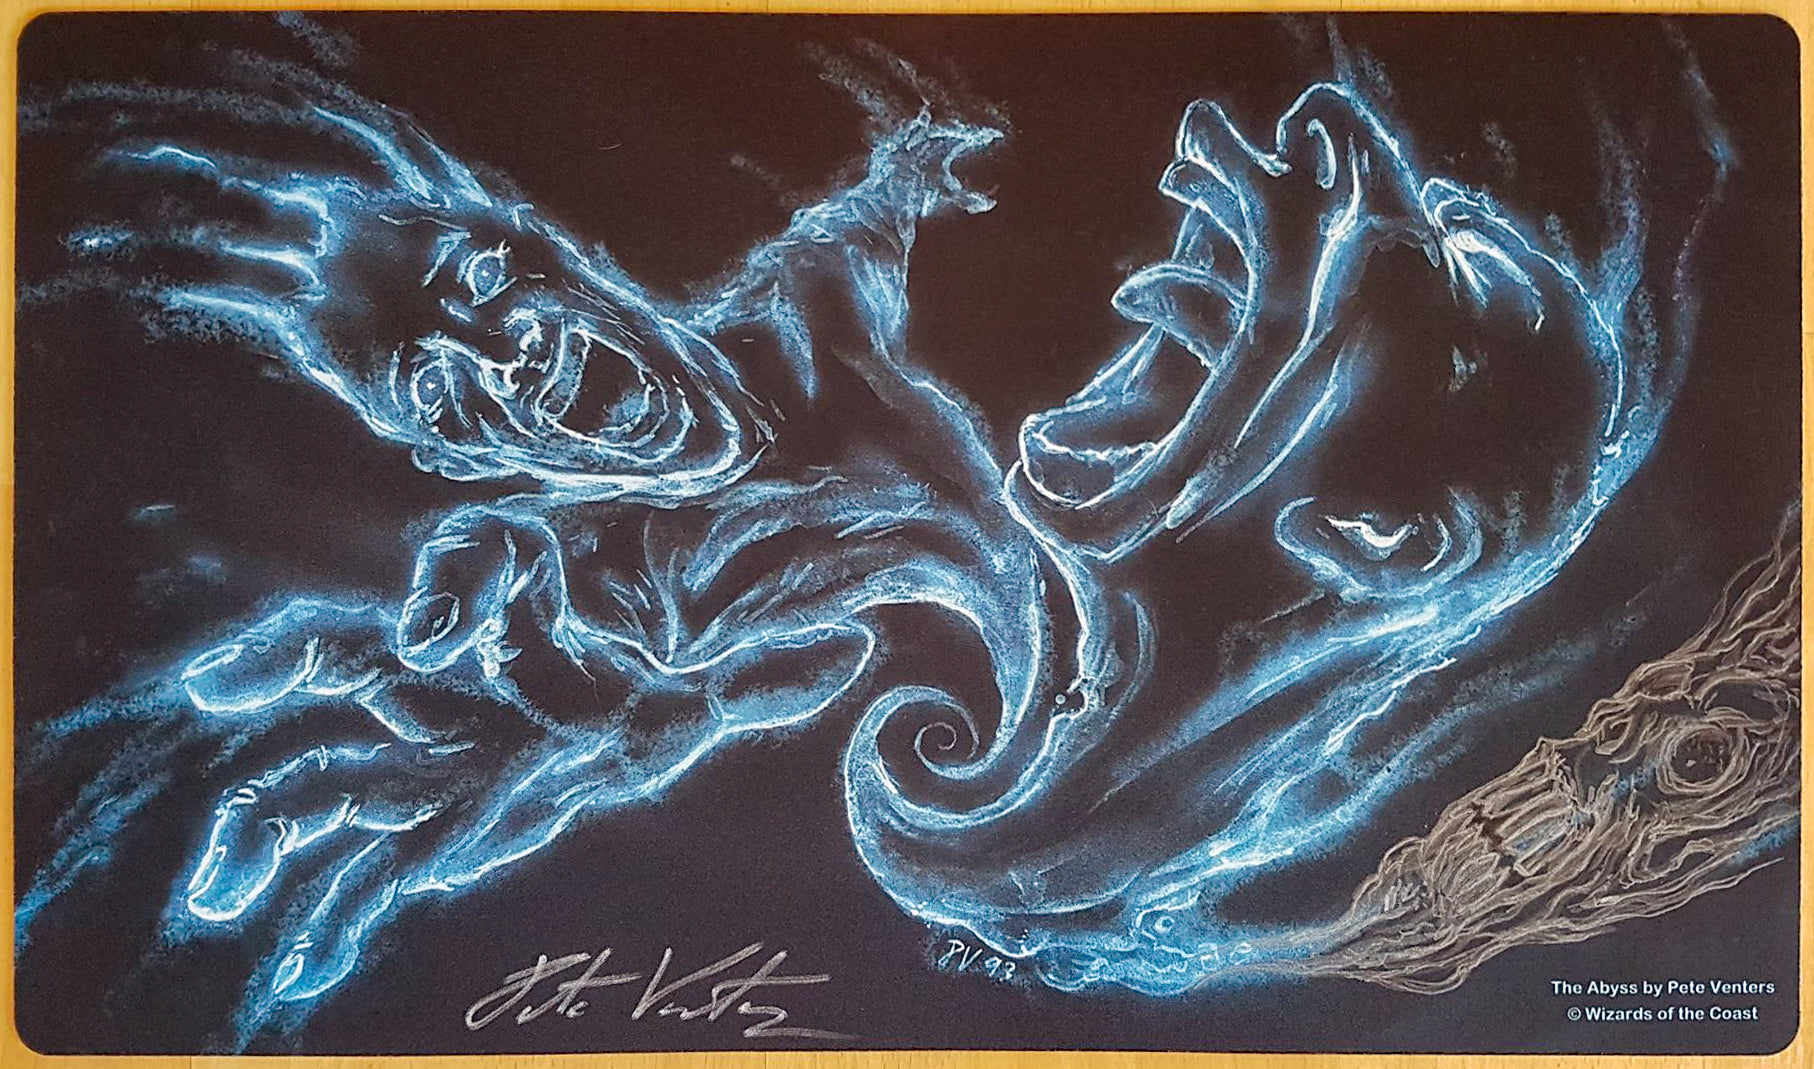 The Abyss - Pete Venters - Sketched [Version 3] - Signed by the Artist - MTG Playmat